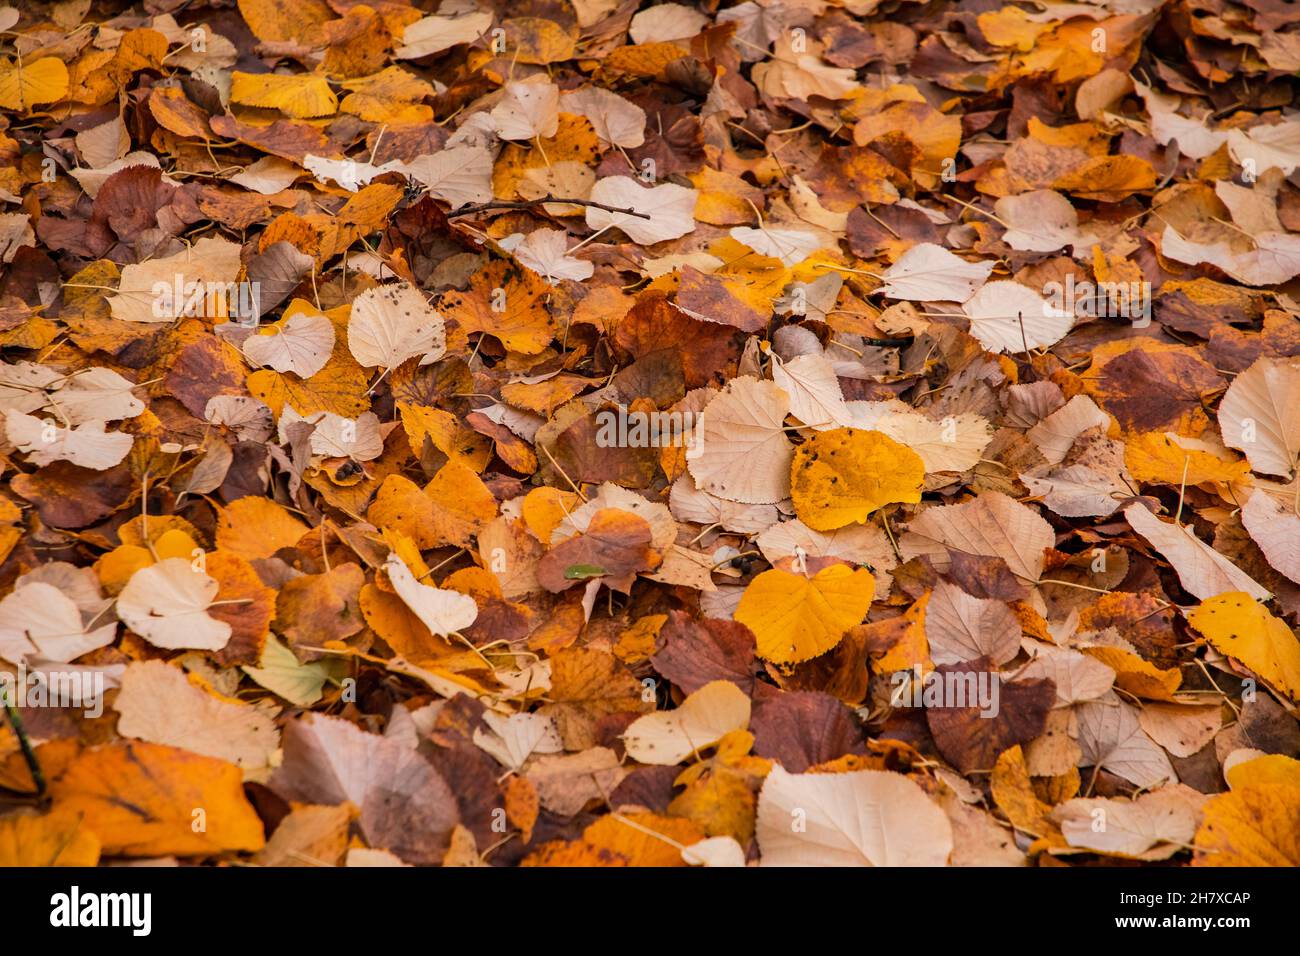 Fallen variegated leaves in late autumn in the colors red, brown, organs and yellow Stock Photo